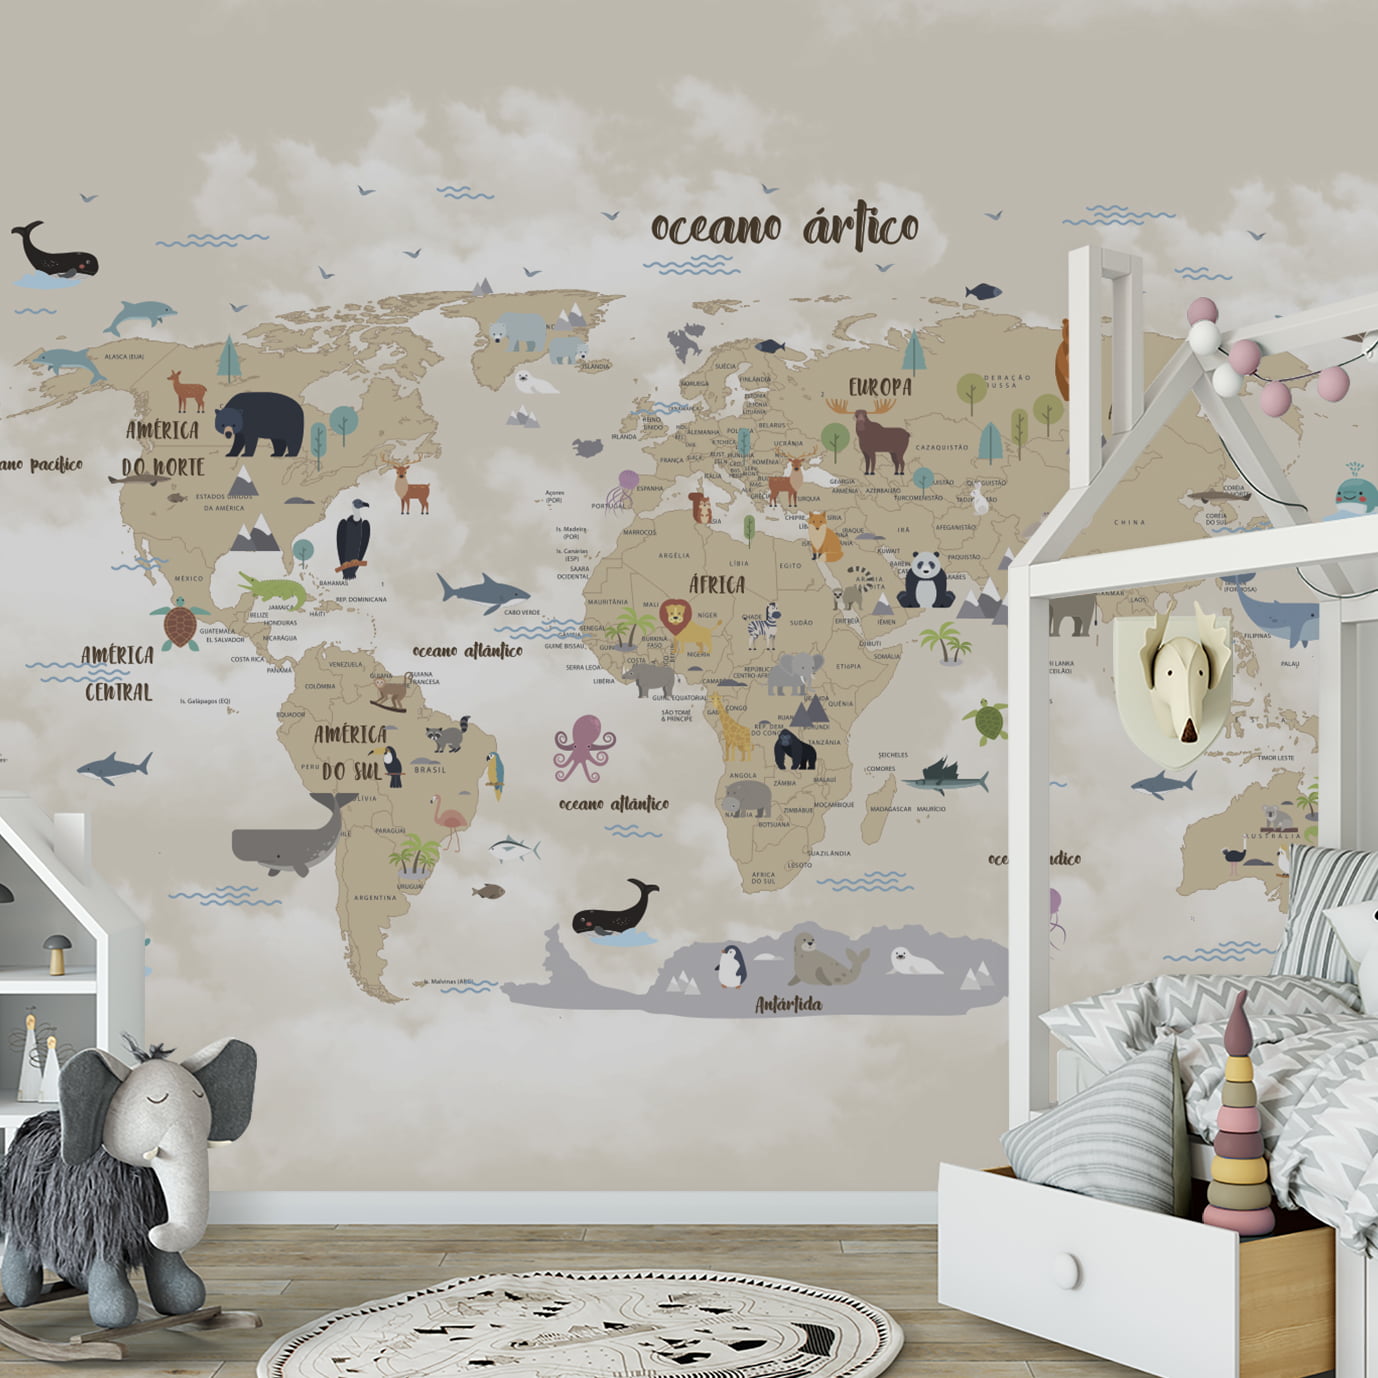 How to Design a Nursery Gallery Wall – Paper Mundi